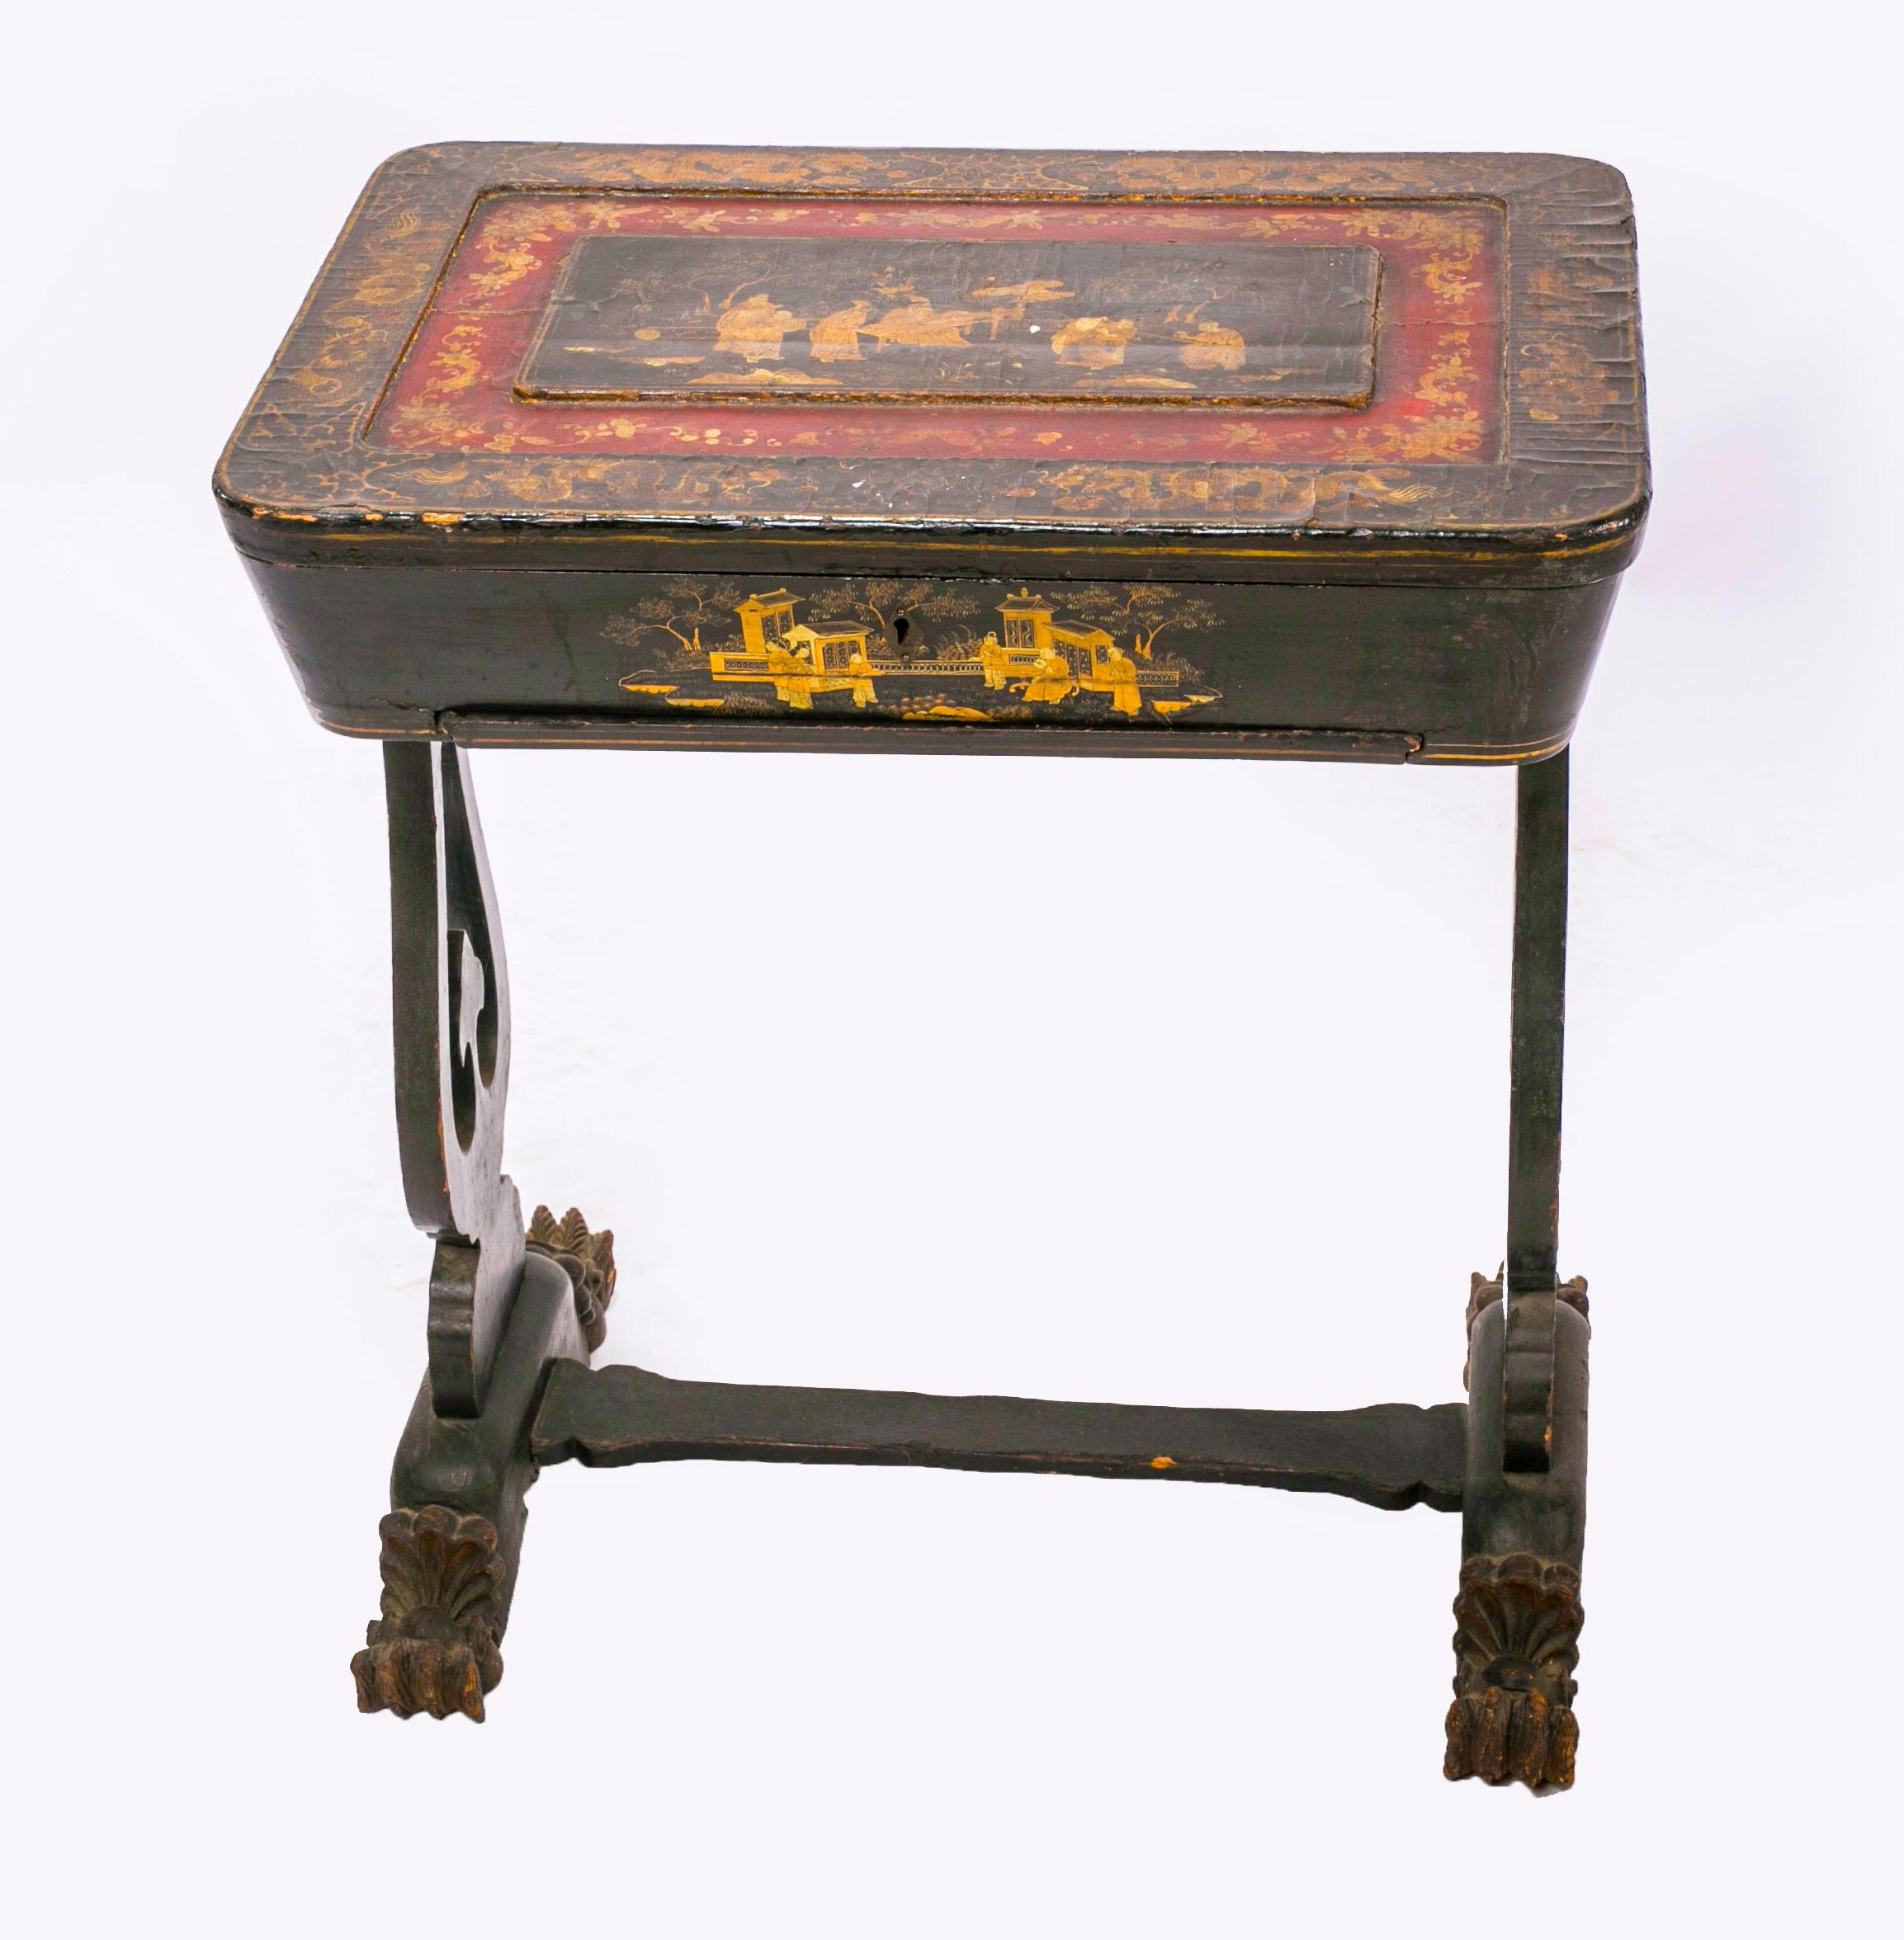 French coffee table with chinoiserie

French side table with chinoiserie, finely decorated with Chinese lacquer, in the interior compartment divided into small spaces and small drawers.
Epoch: second half of the 1800s

Measurements: L. cm 62 - D. cm